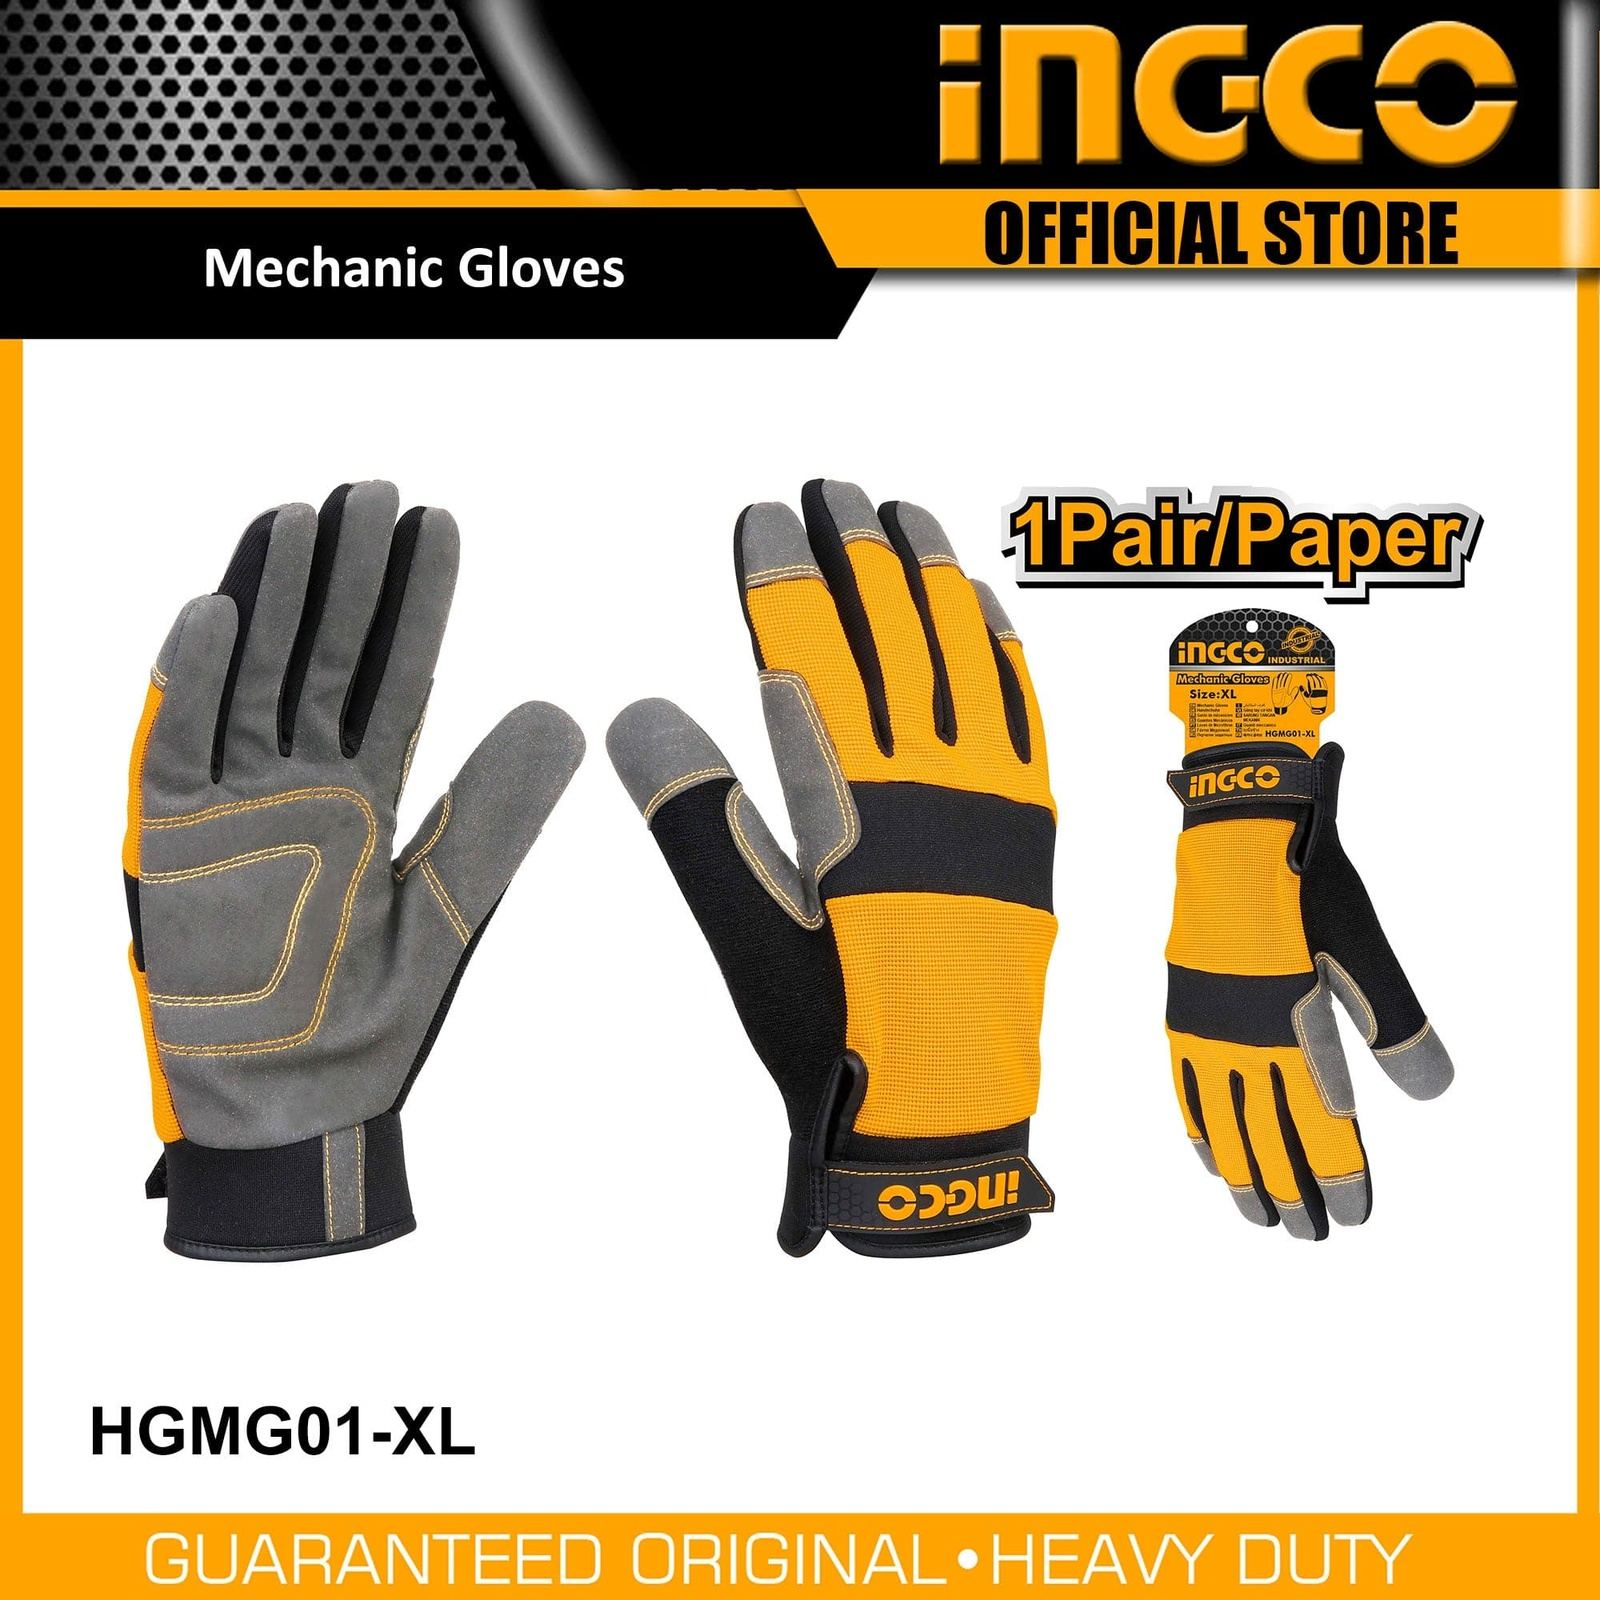 Ingco Mechanic Gloves - HGMG01-XL | Buy Online in Accra, Ghana - Supply Master Work Gloves Buy Tools hardware Building materials